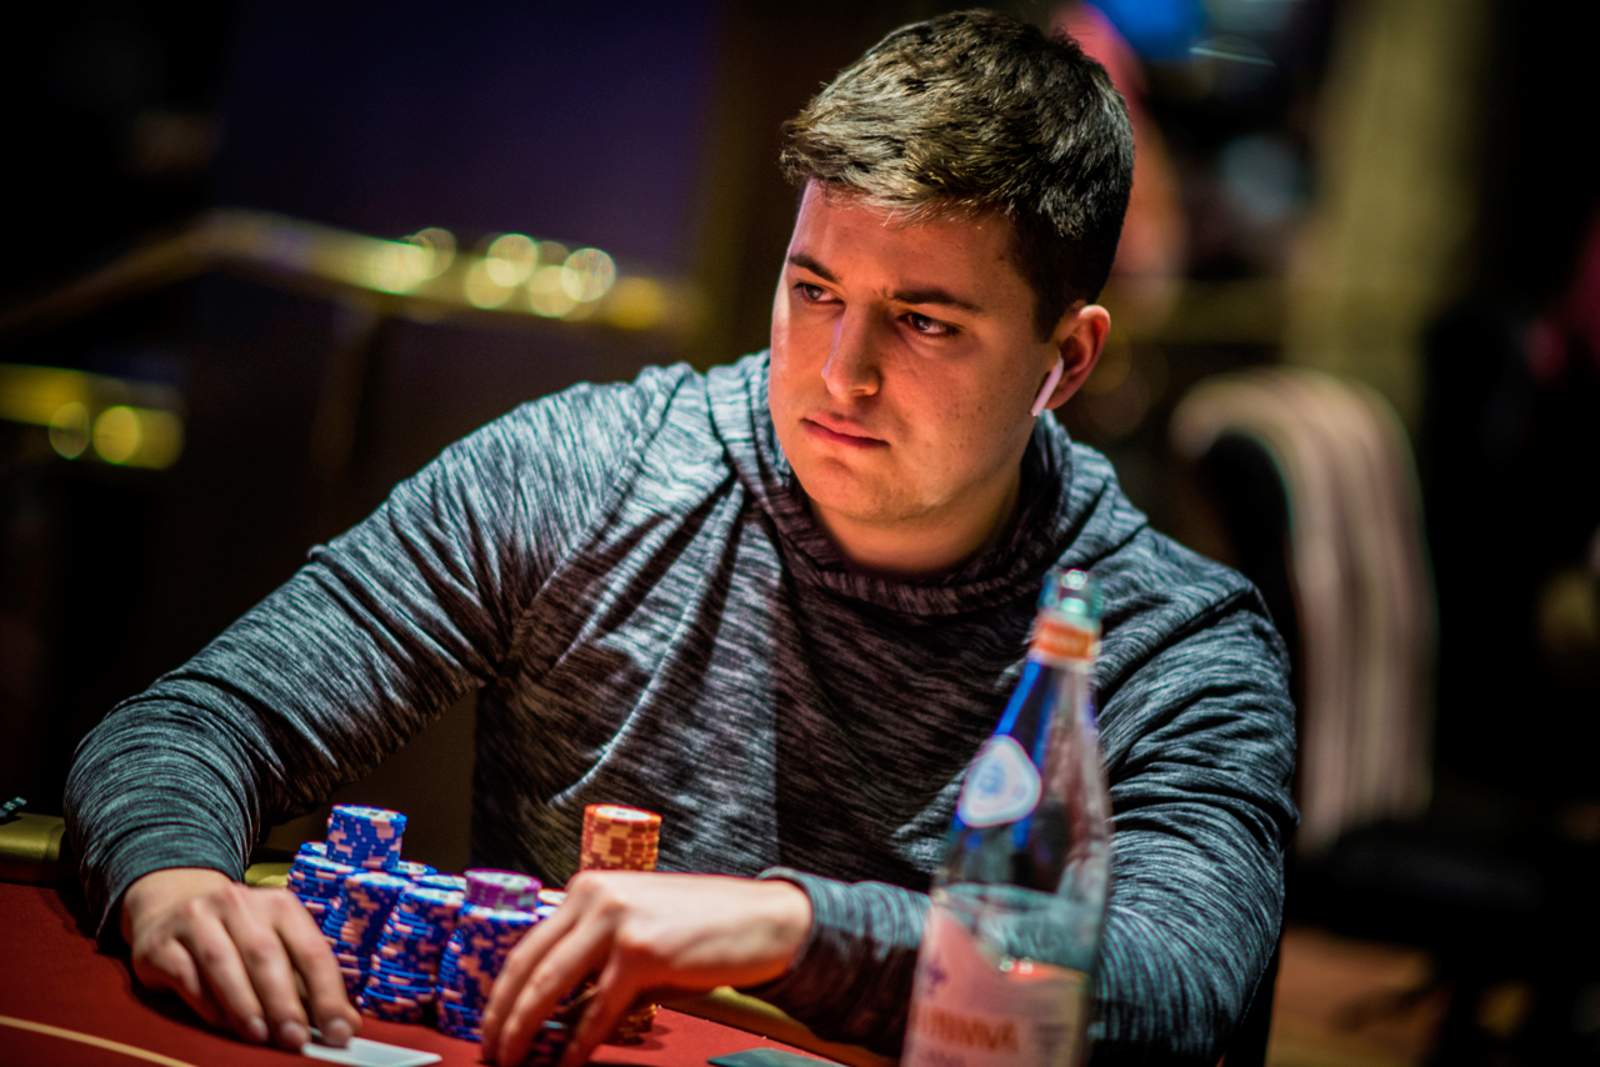 Schindler Leads Second $10K High Roller Final Table